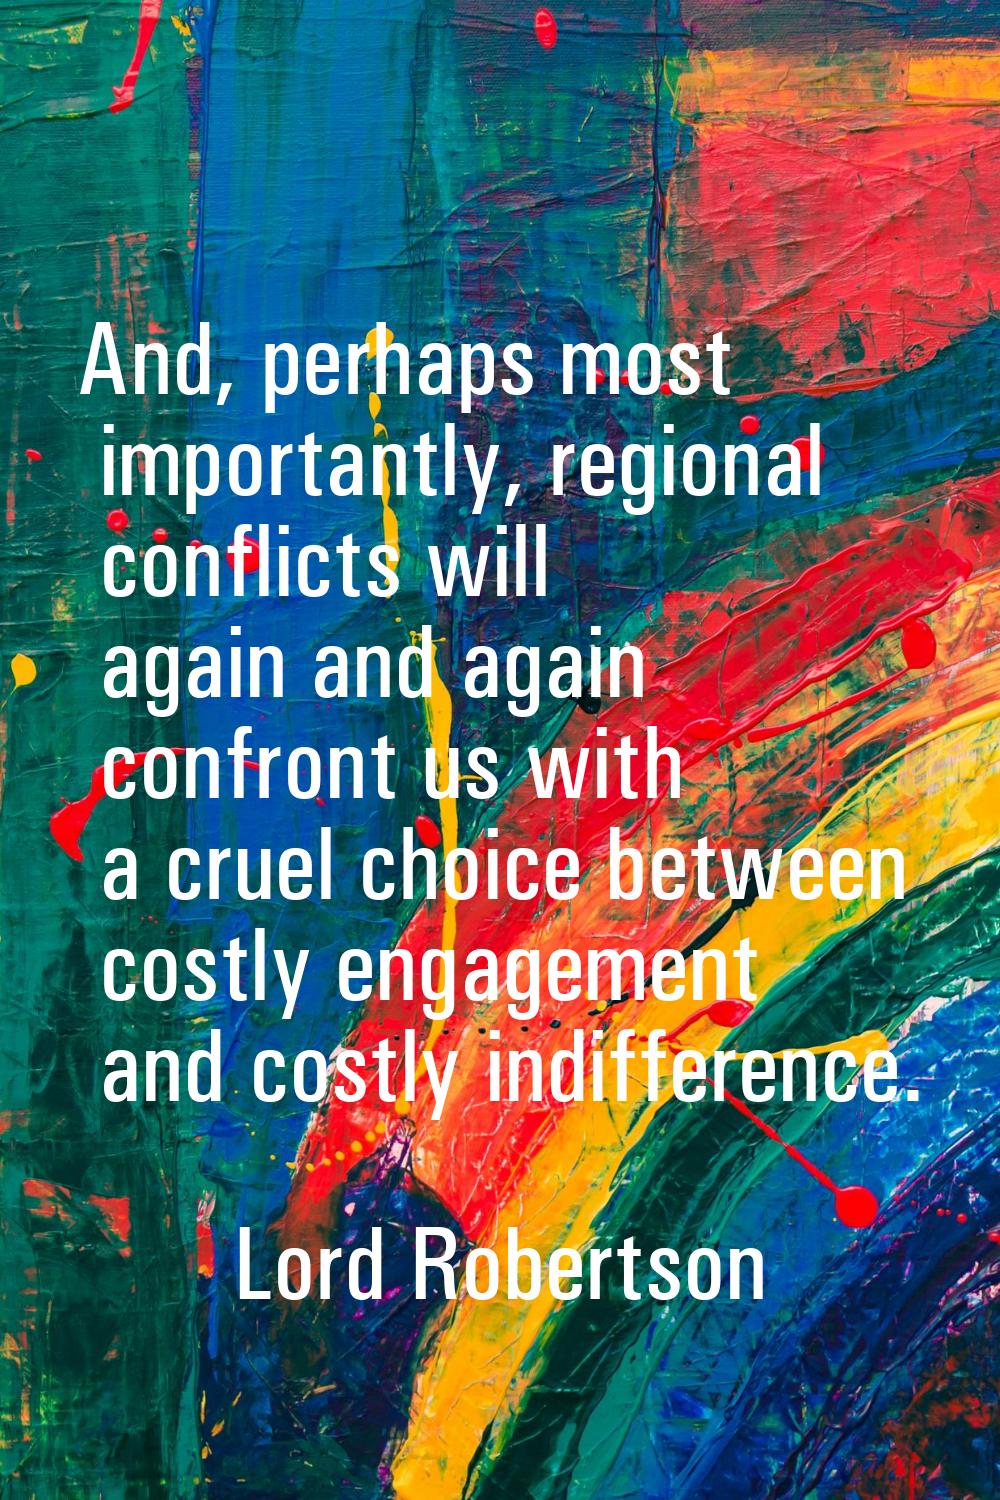 And, perhaps most importantly, regional conflicts will again and again confront us with a cruel cho